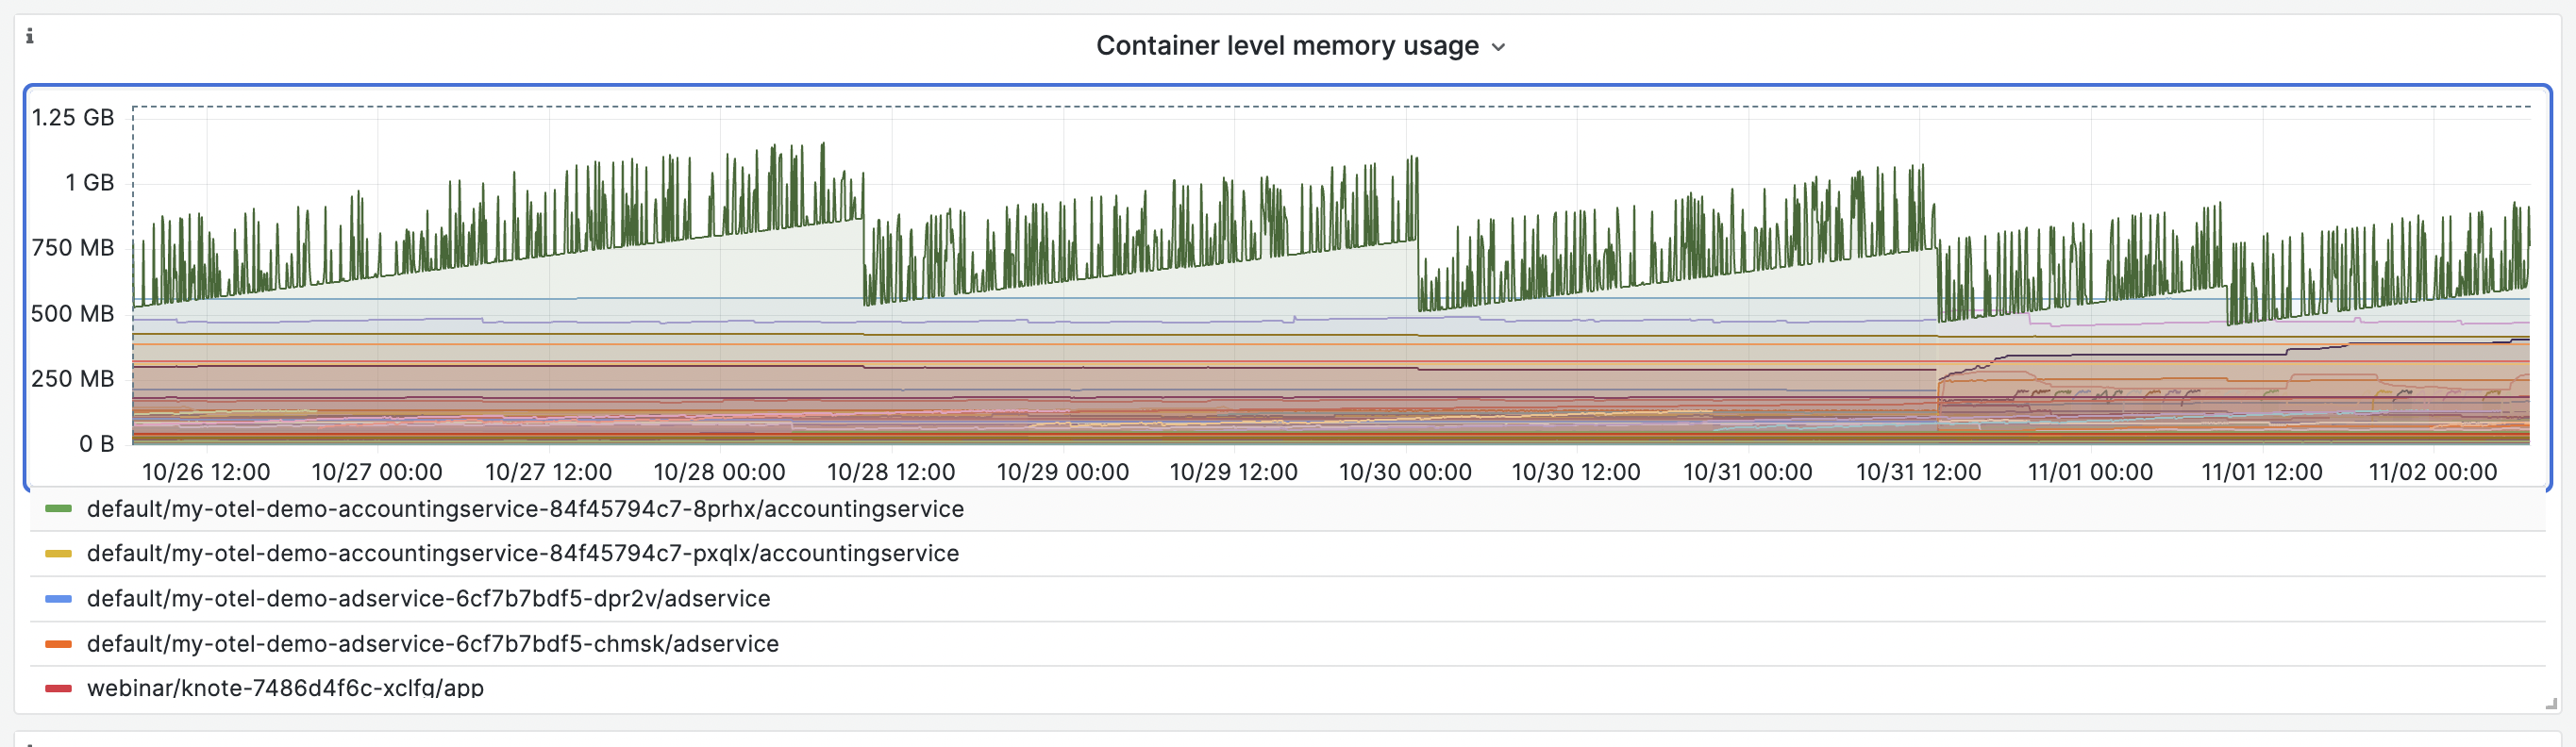 Container Level Memory Usage Monitoring